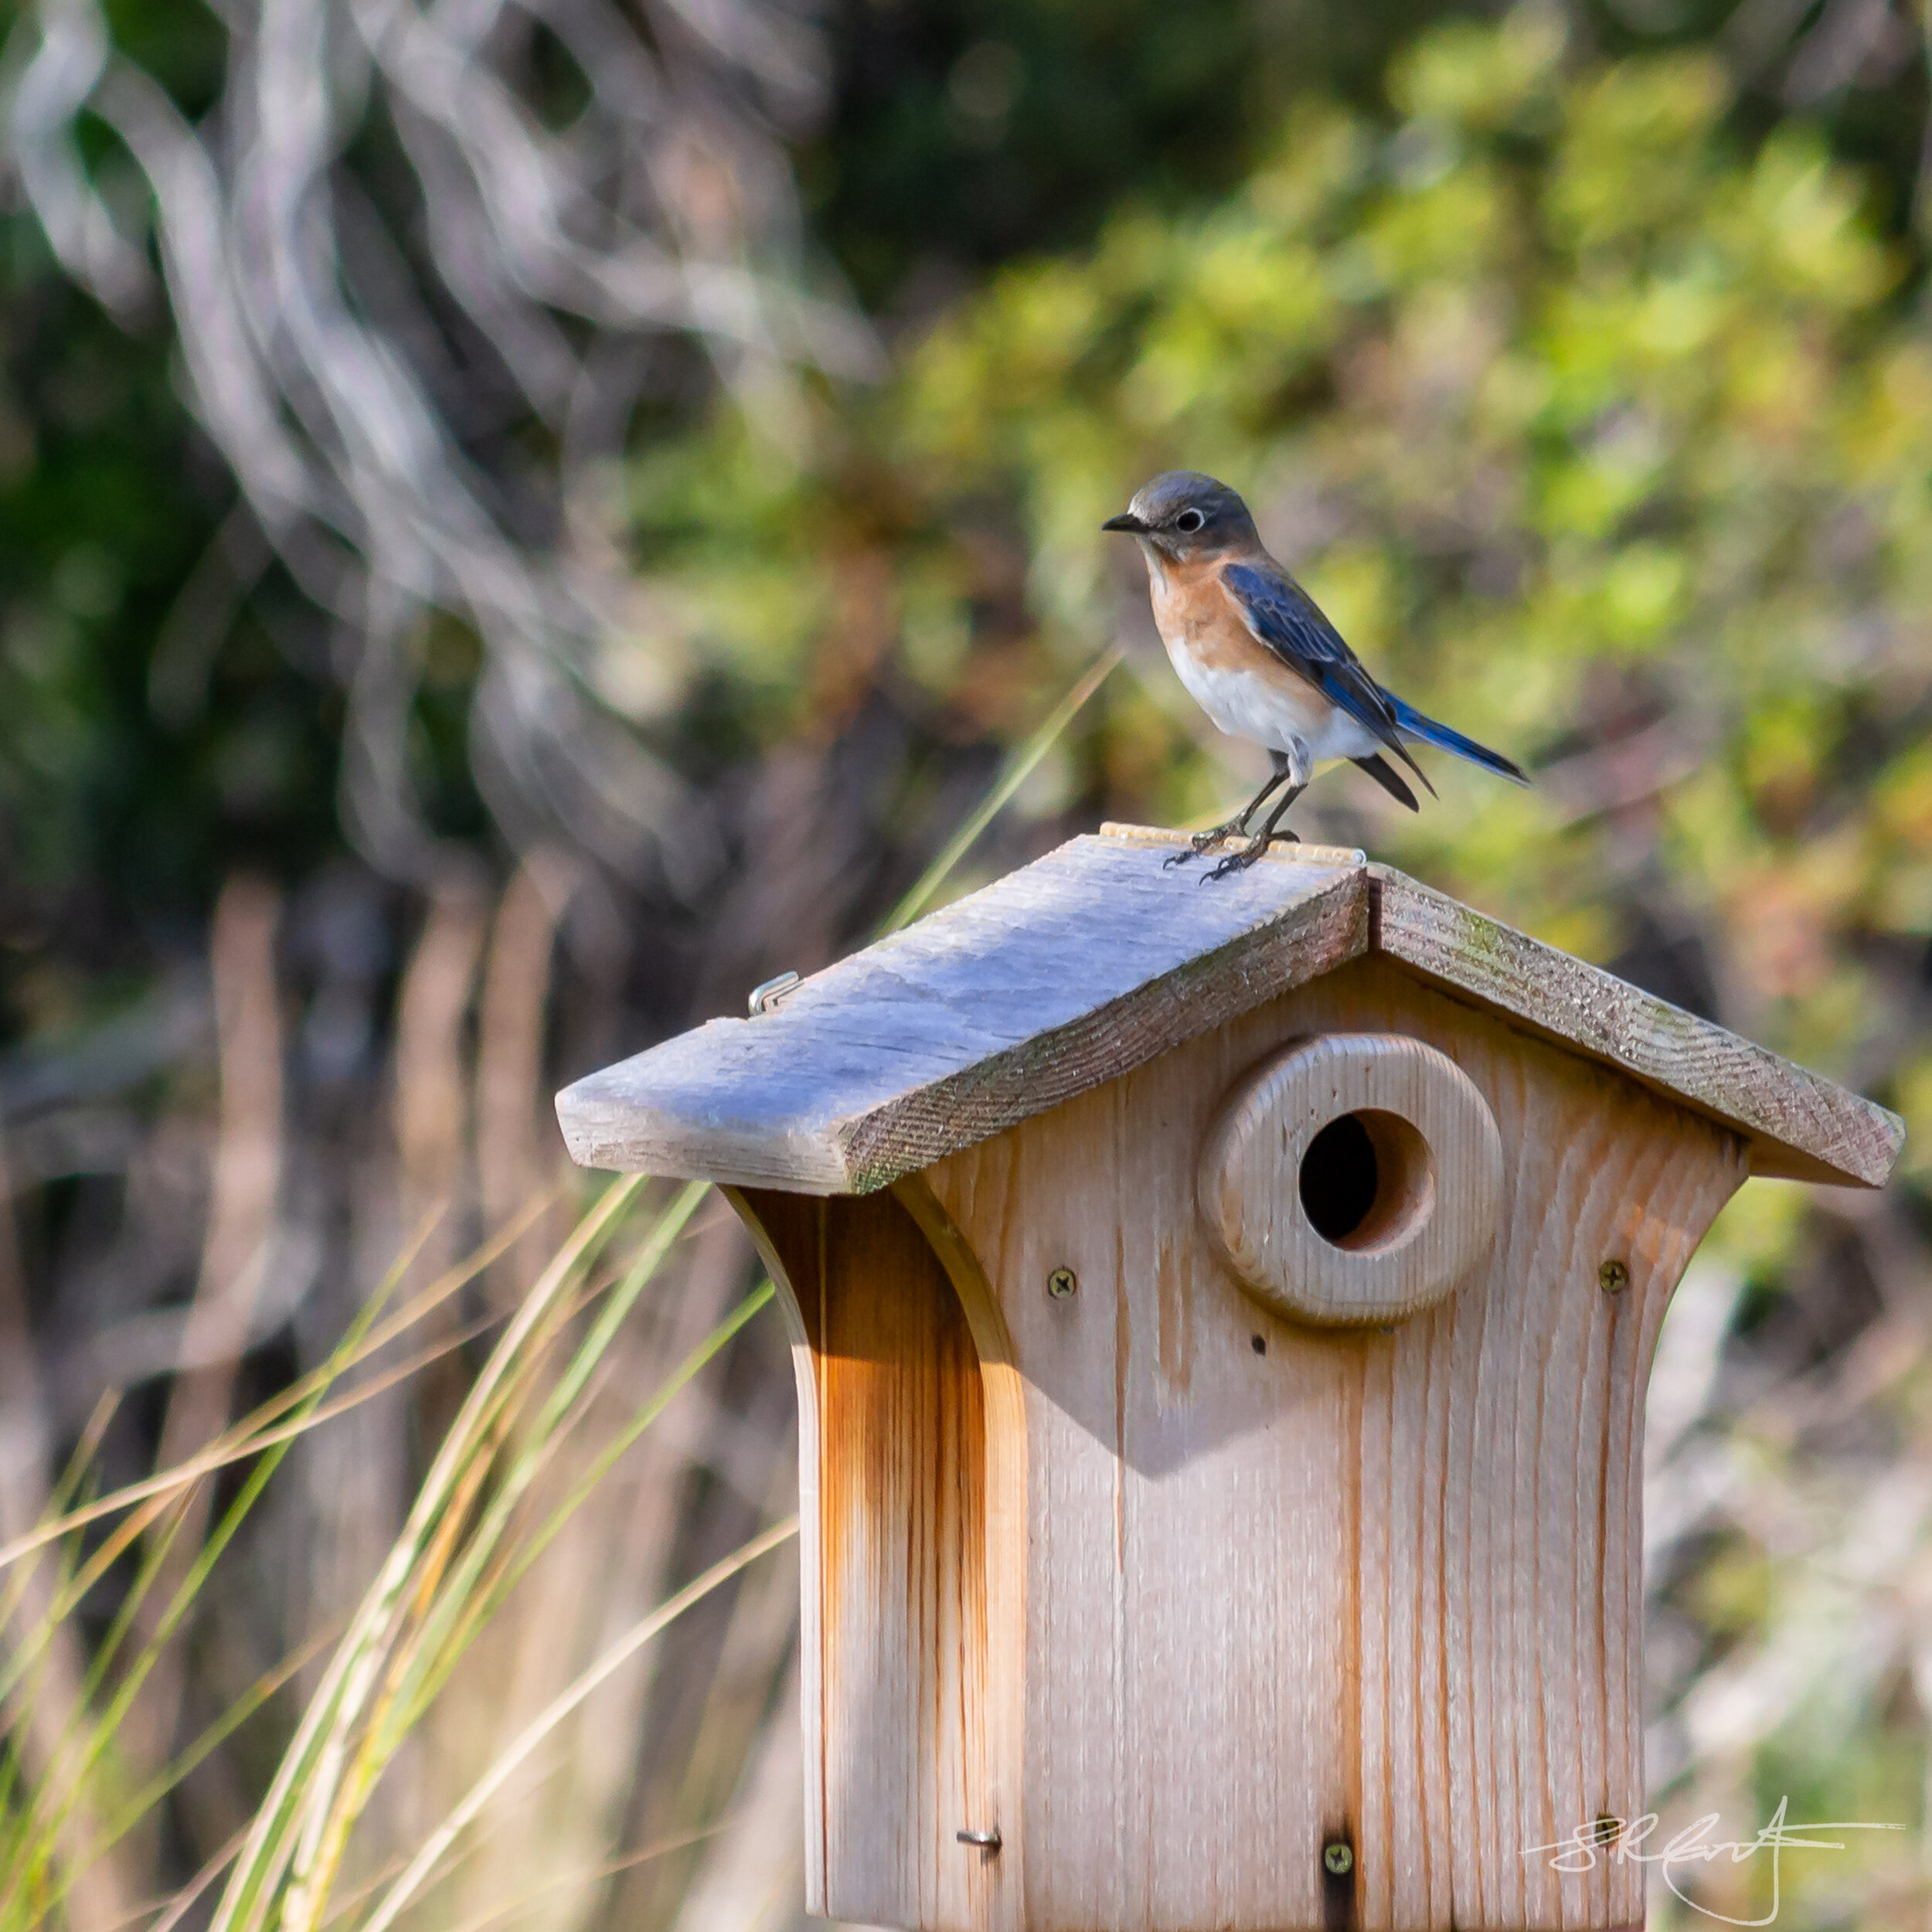 BlueBird checking out the House